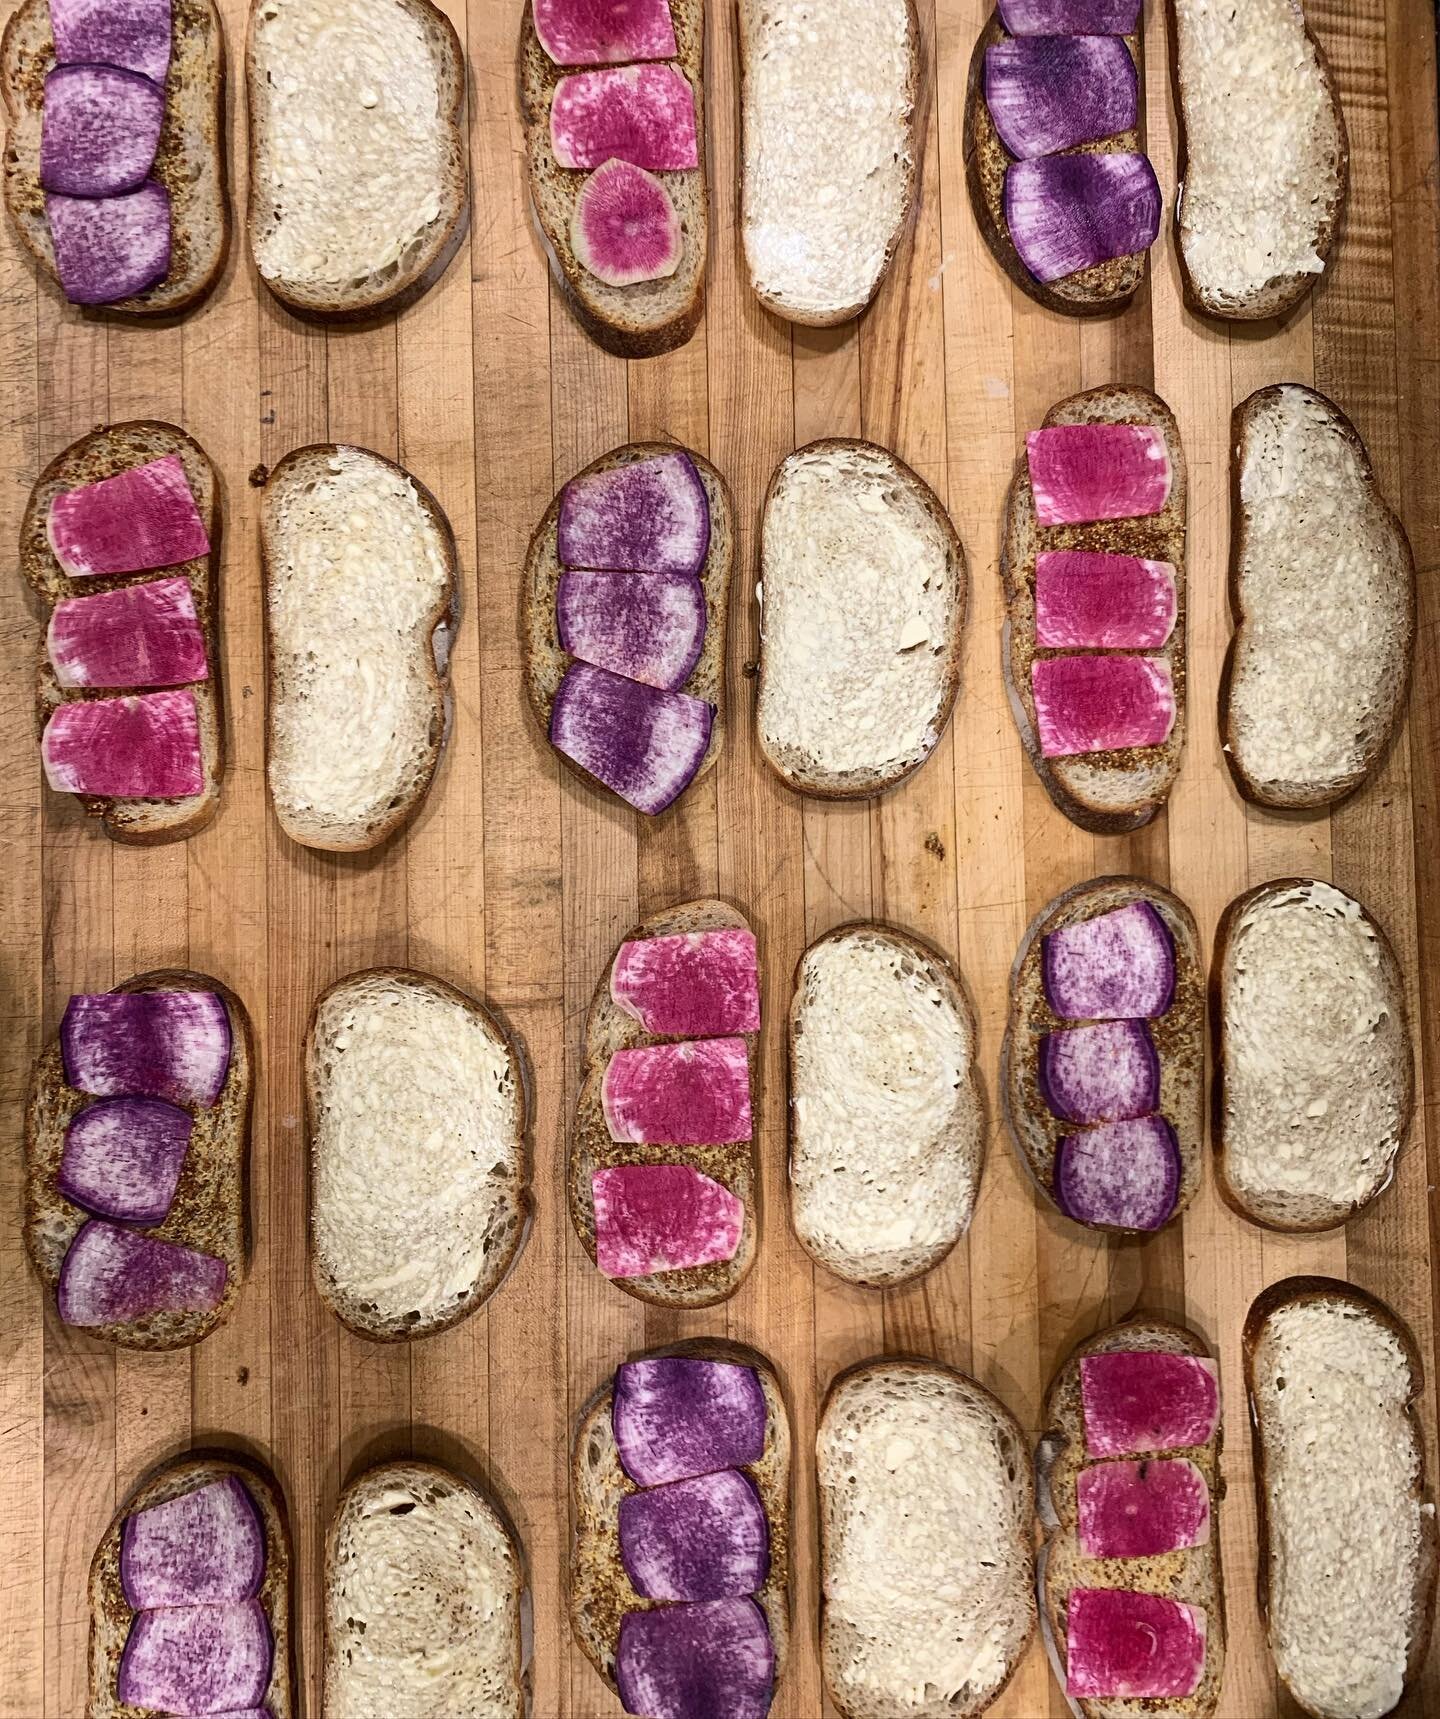 Pork and Smoked Gouda sandwiches in the making. Purple daikon and watermelon radishes make the best garnish 💜💕